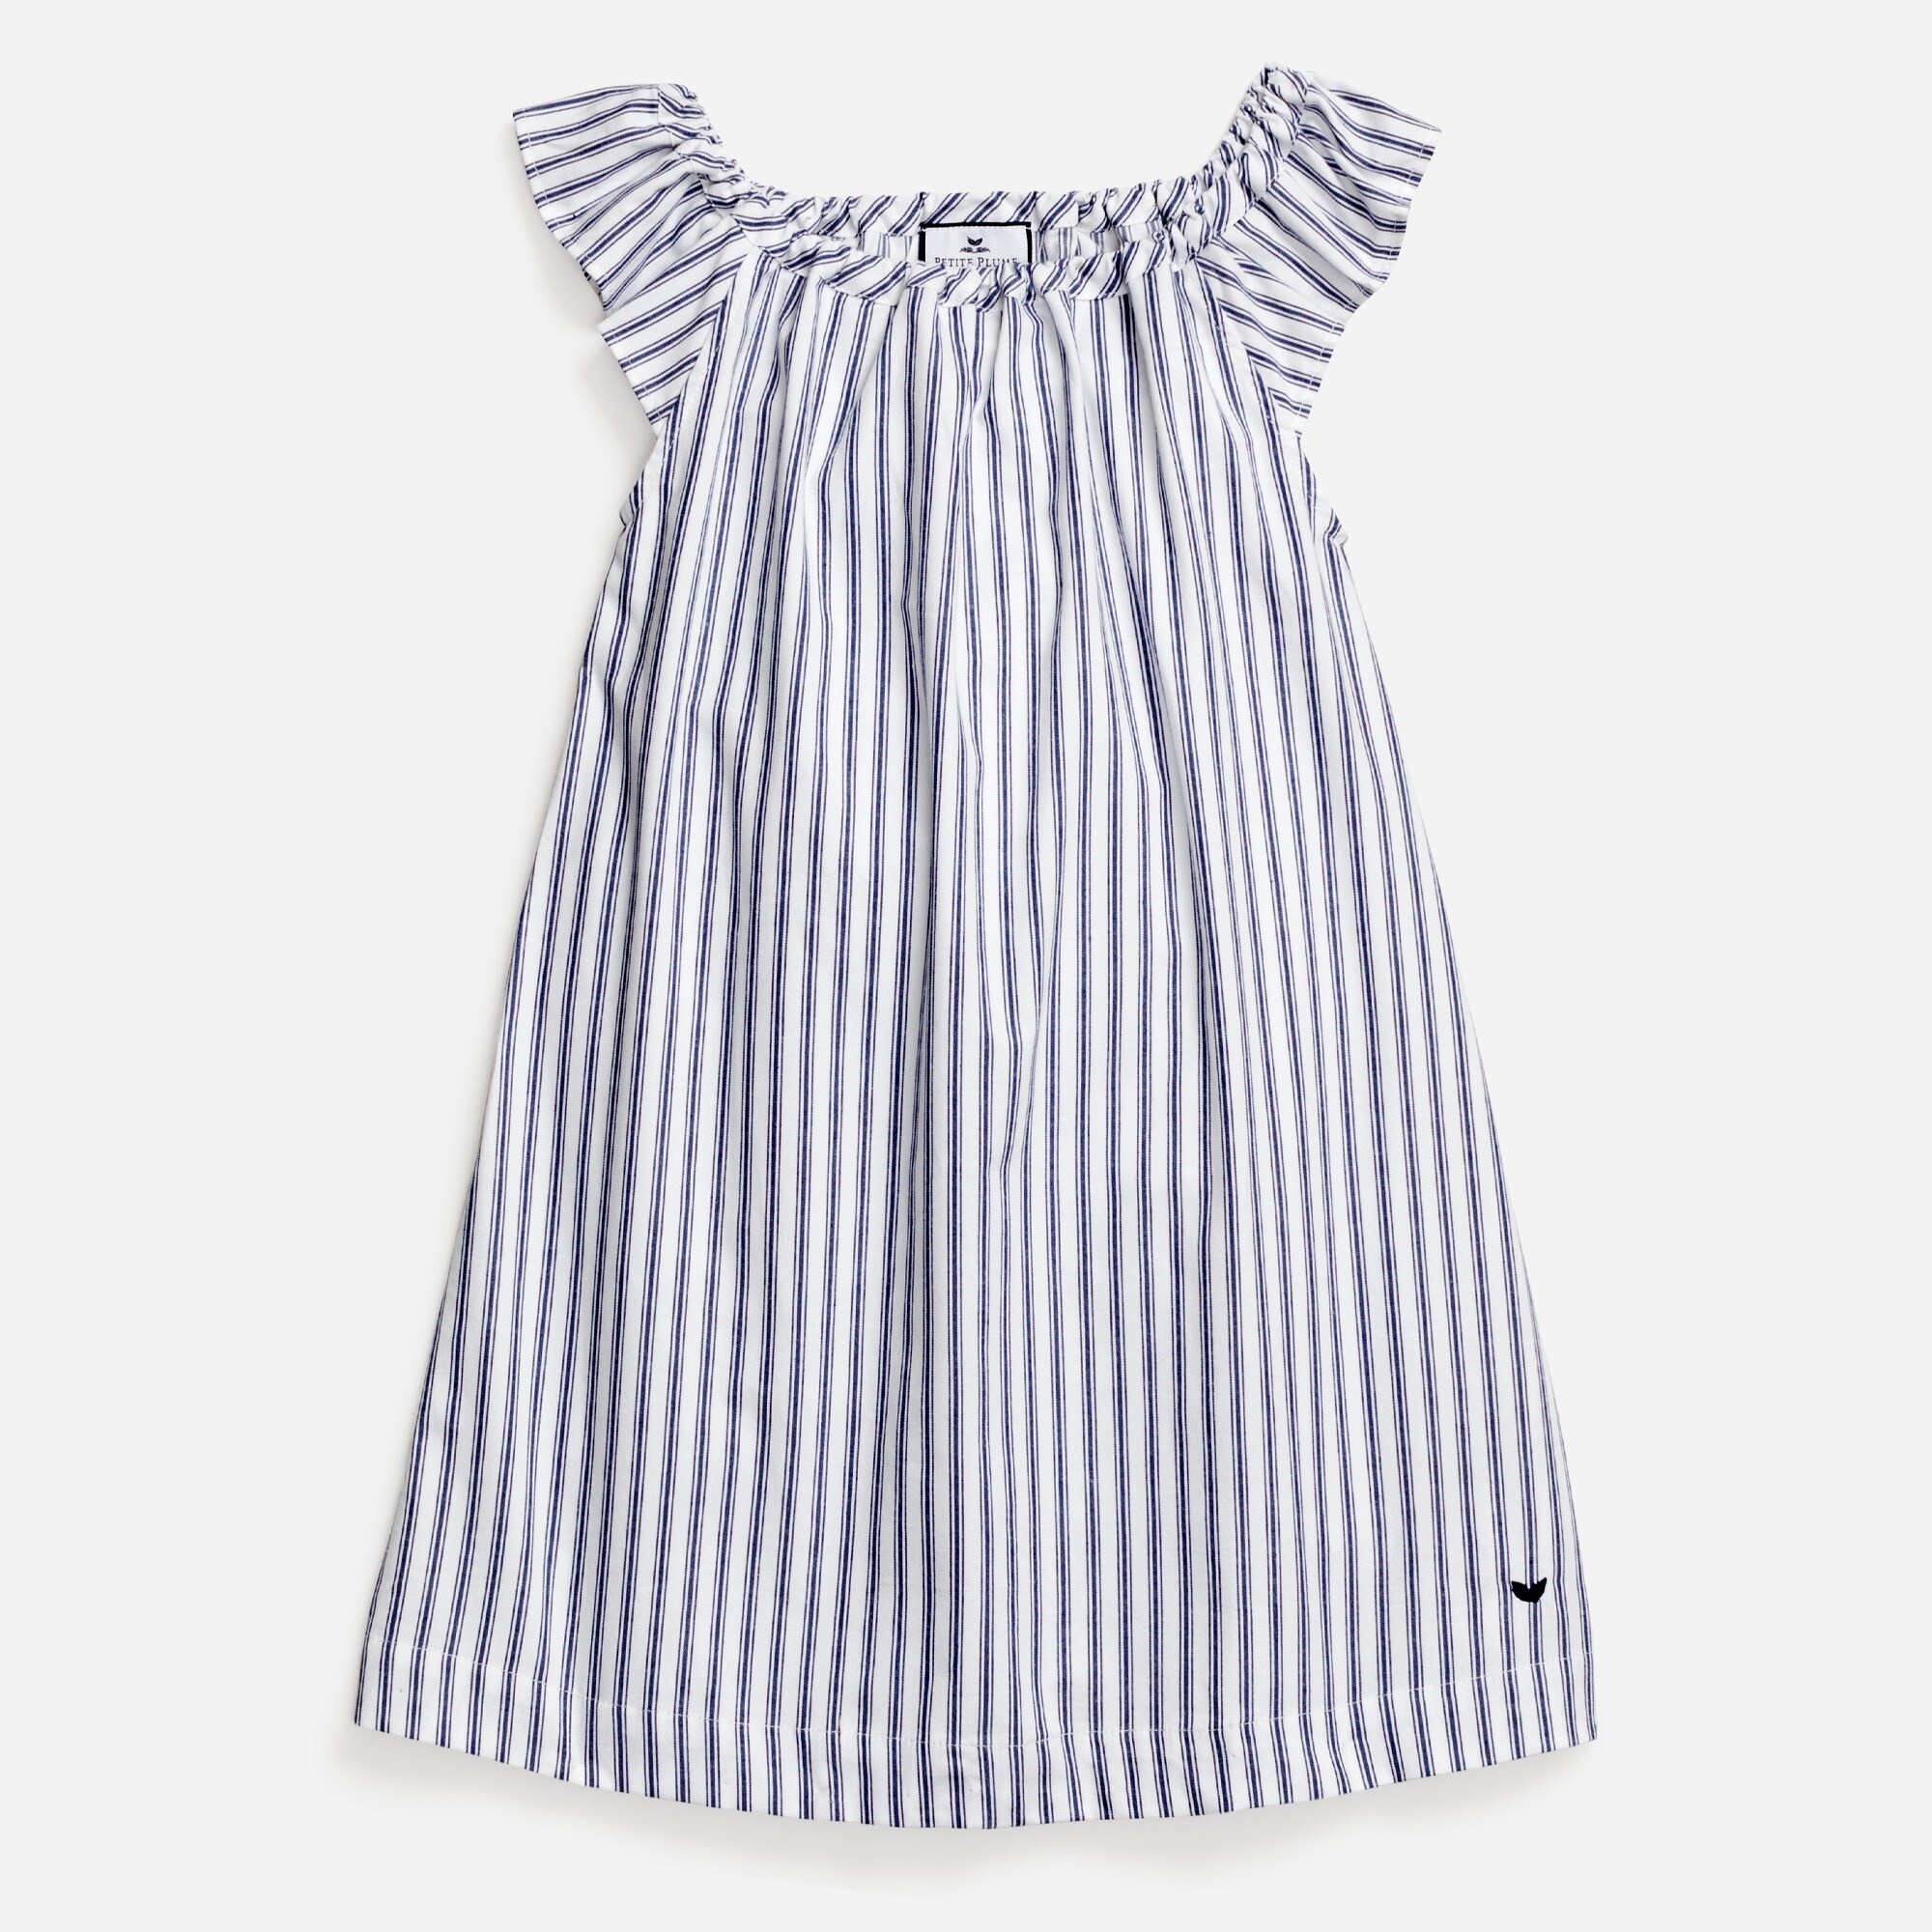  Petite Plume™  kids' Isabelle nightgown